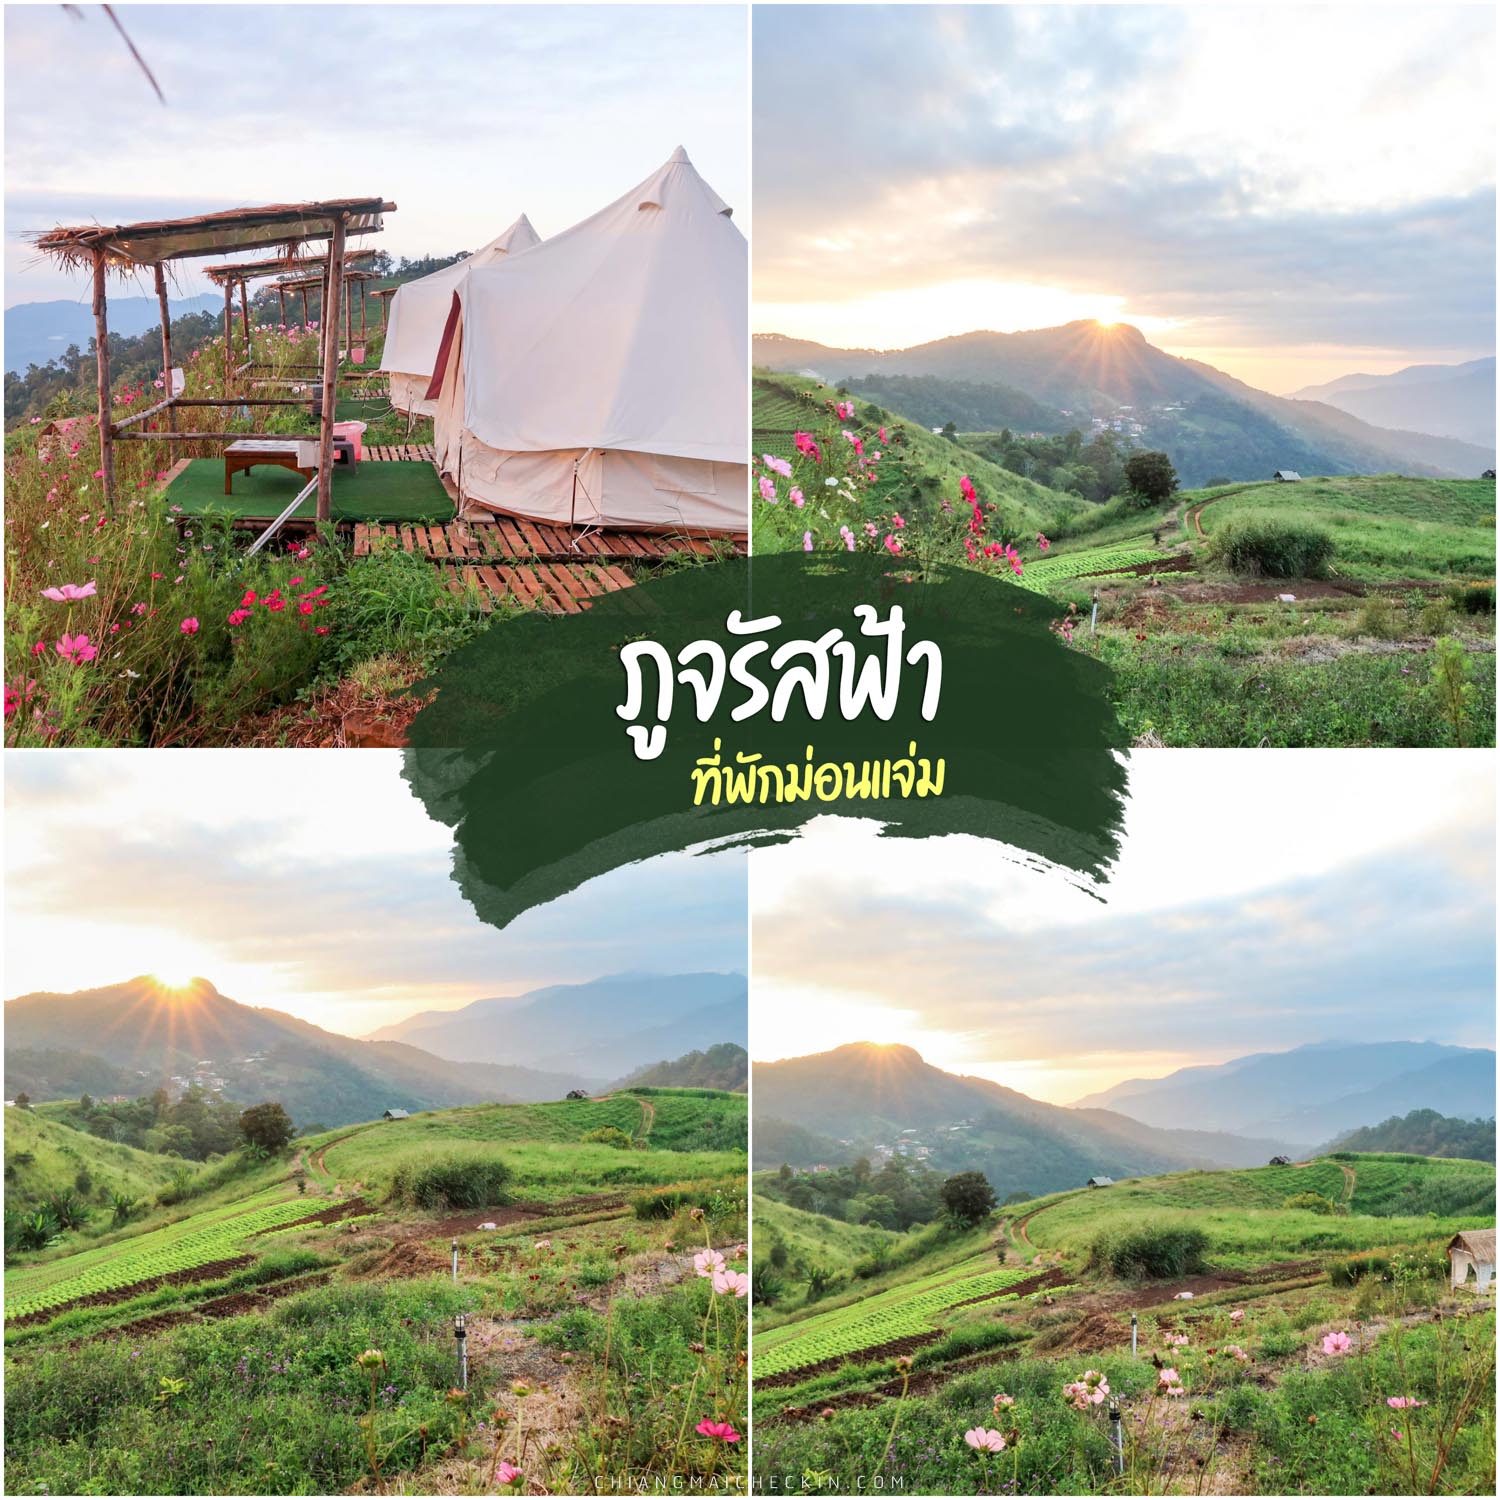 Phu Charat Fah, Mon Jam, Chiang Mai, the most beautiful accommodation with white tents amidst the mist. With a million-dollar 360 degree view, you have to come check in.